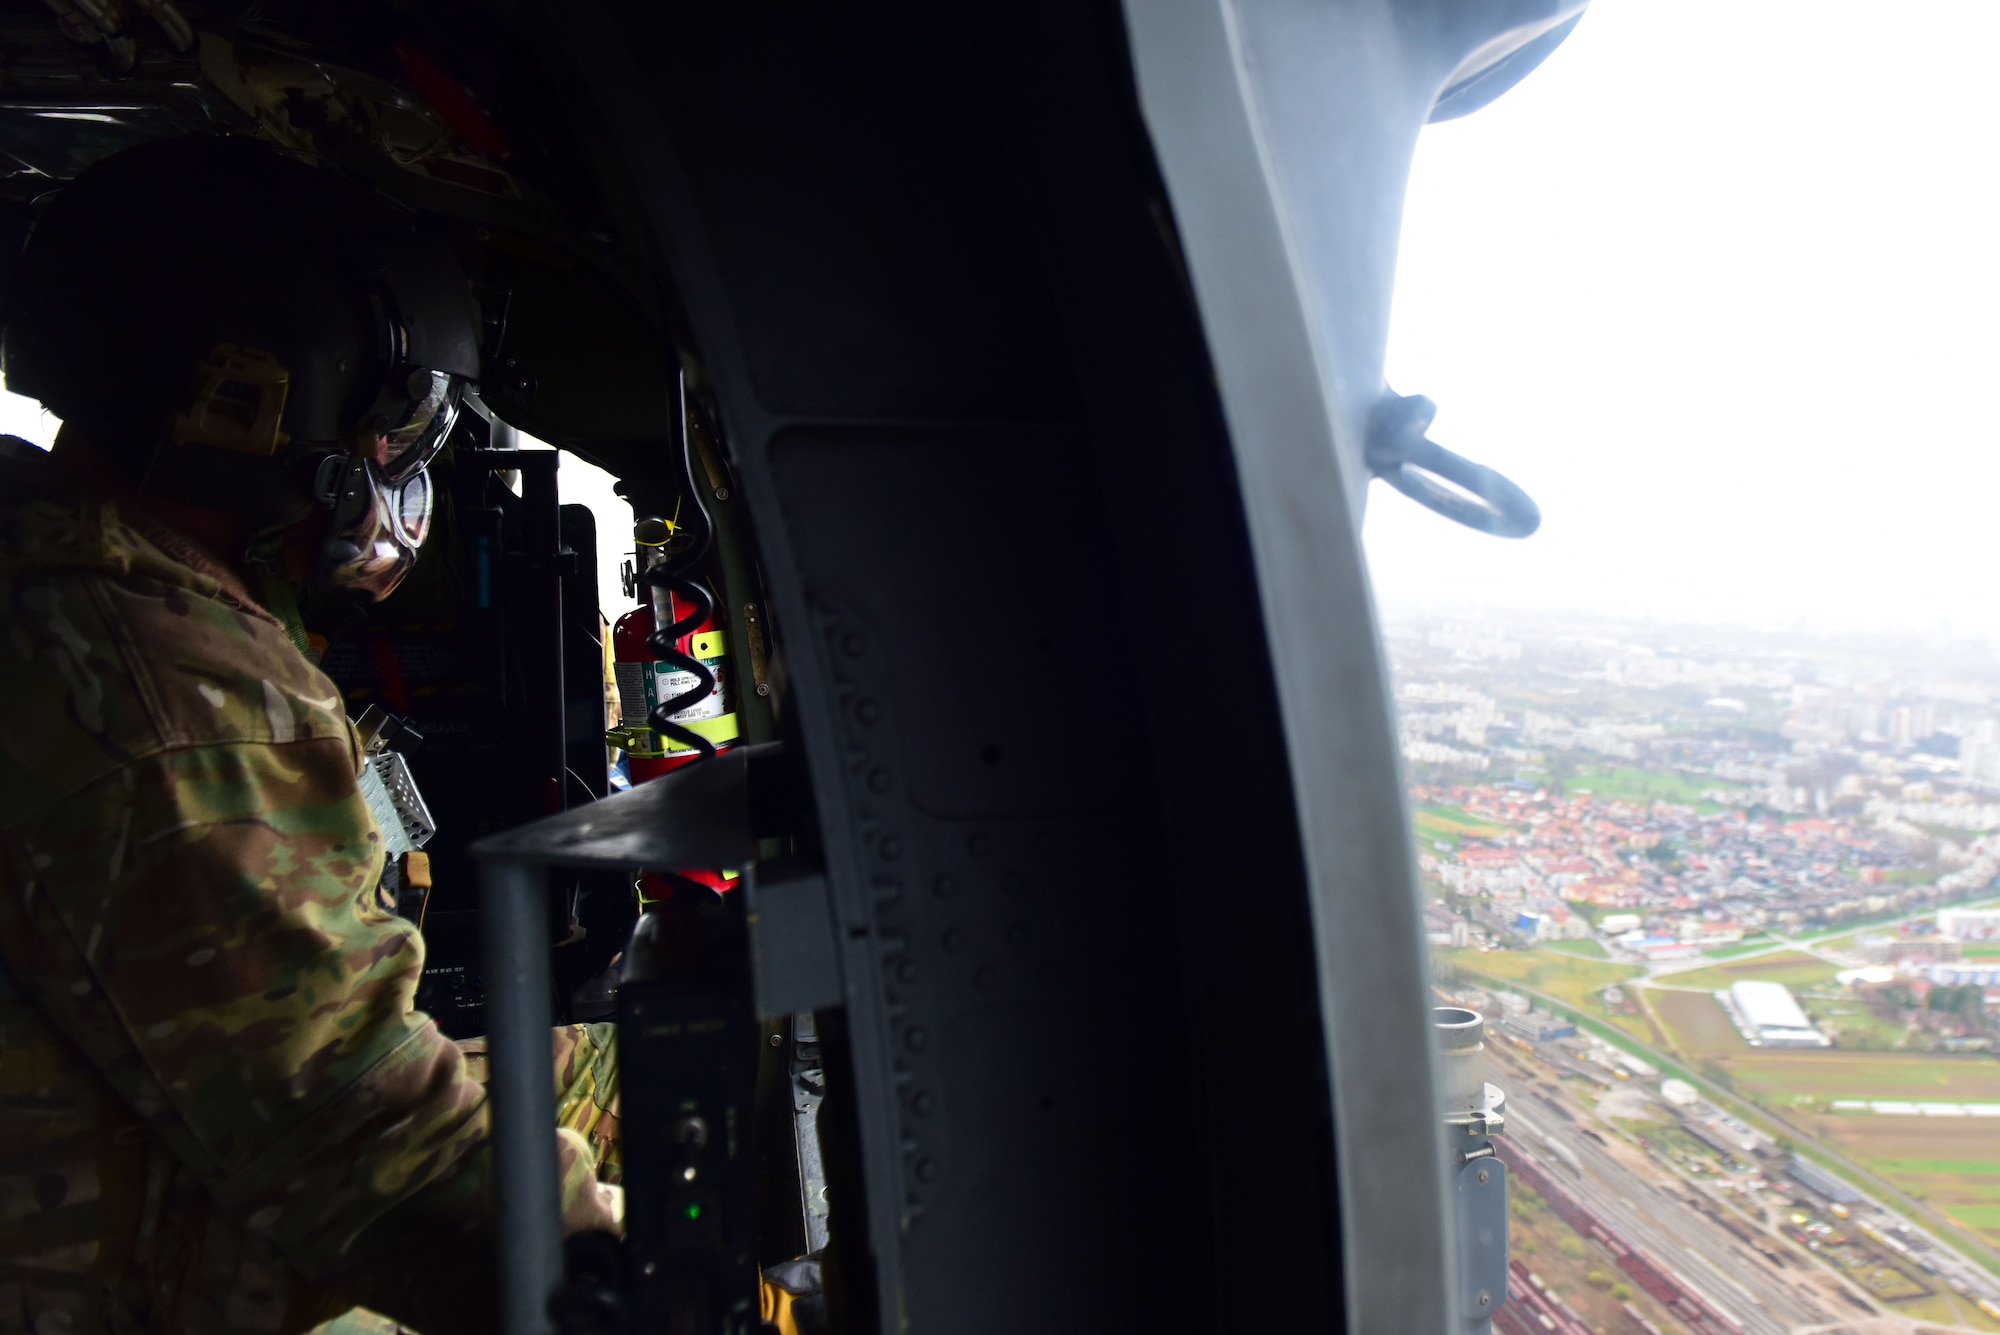 A 56th Rescue Squadron special mission aviator, stationed at Aviano Air Base, Italy, surveys a landing zone during a Non-combatant Evacuation Operation exercise near Zagreb, Croatia, March 18, 2019. Special mission aviators survey landing zones and update aircraft crew members on rescue operations. (U.S. Air Force photo by Senior Airman Kevin Sommer Giron)